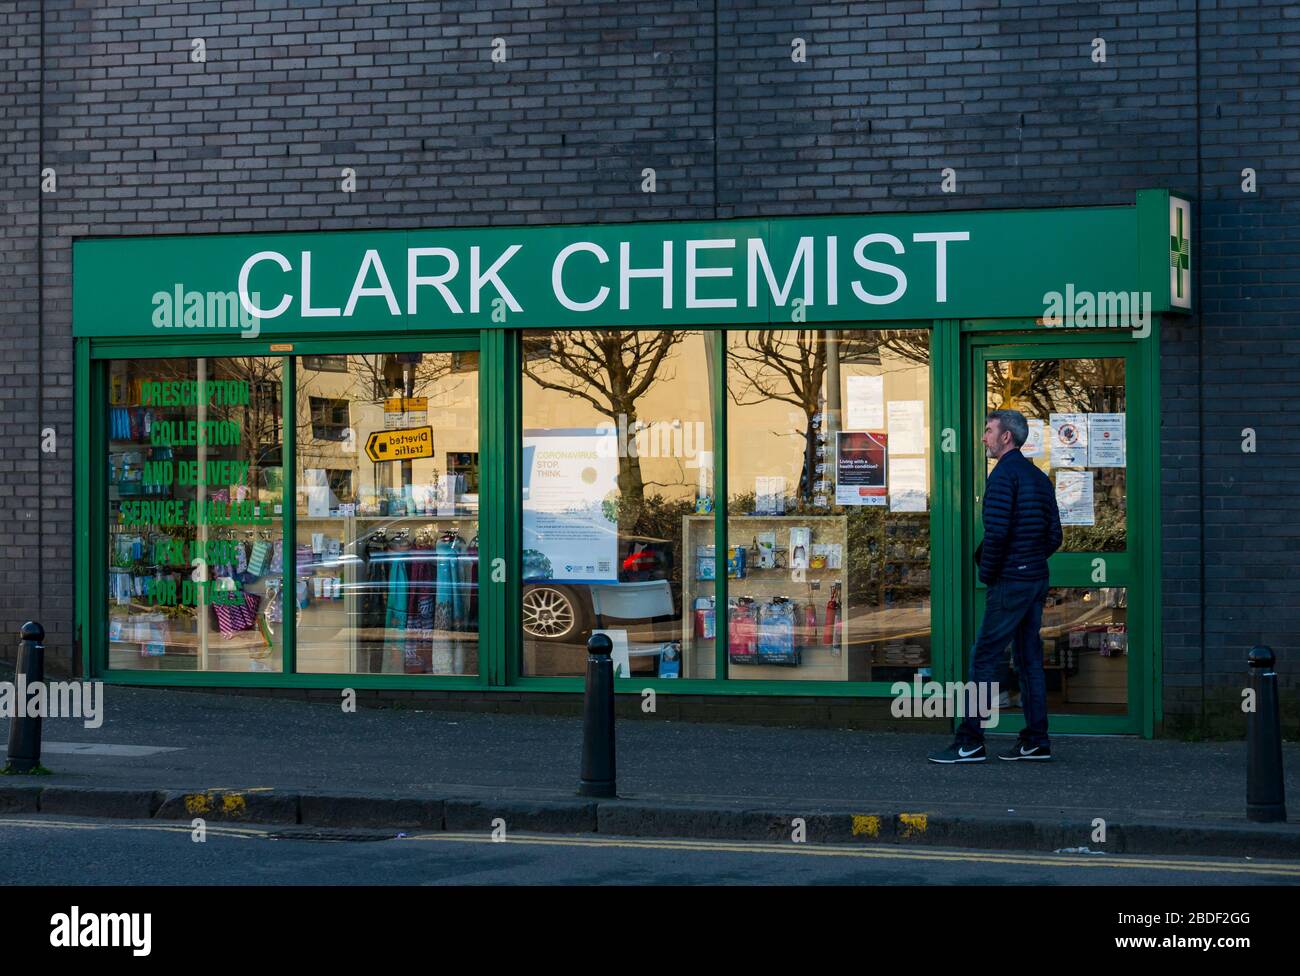 Leith, Edinburgh, Scotland, UK, 8th Apr 2020. Covid-19 lockdown: people continue in lockdown and maintain social distancing. People queue outside a chemist shop Stock Photo